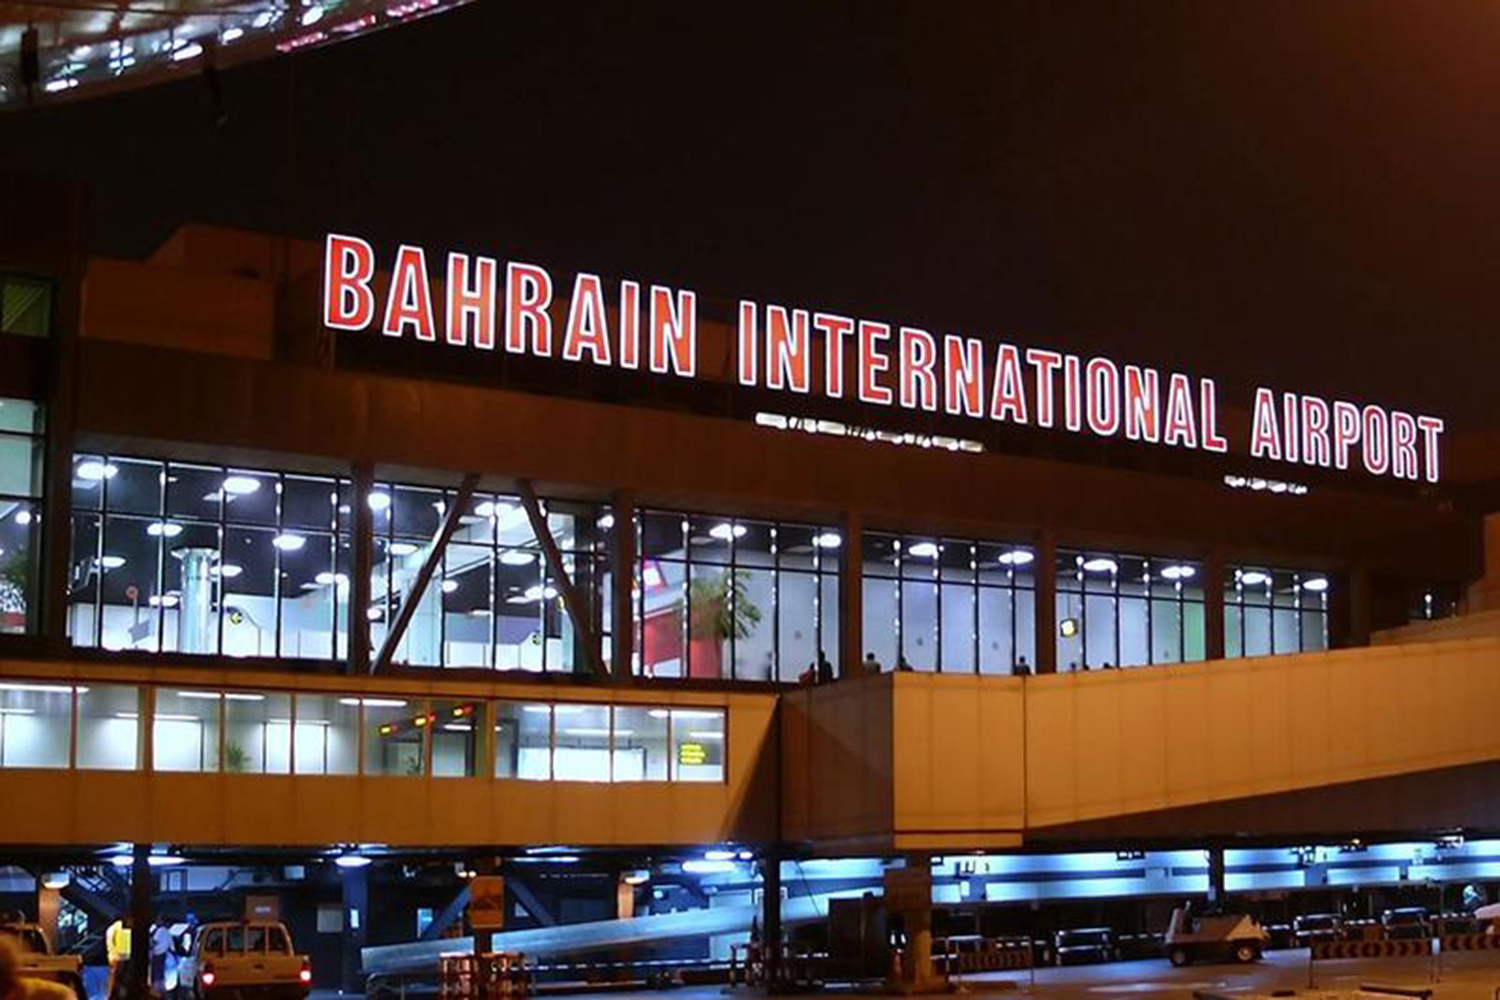 Bahrain International Airport prepares to transfer operations to new Passenger Terminal on 28 January